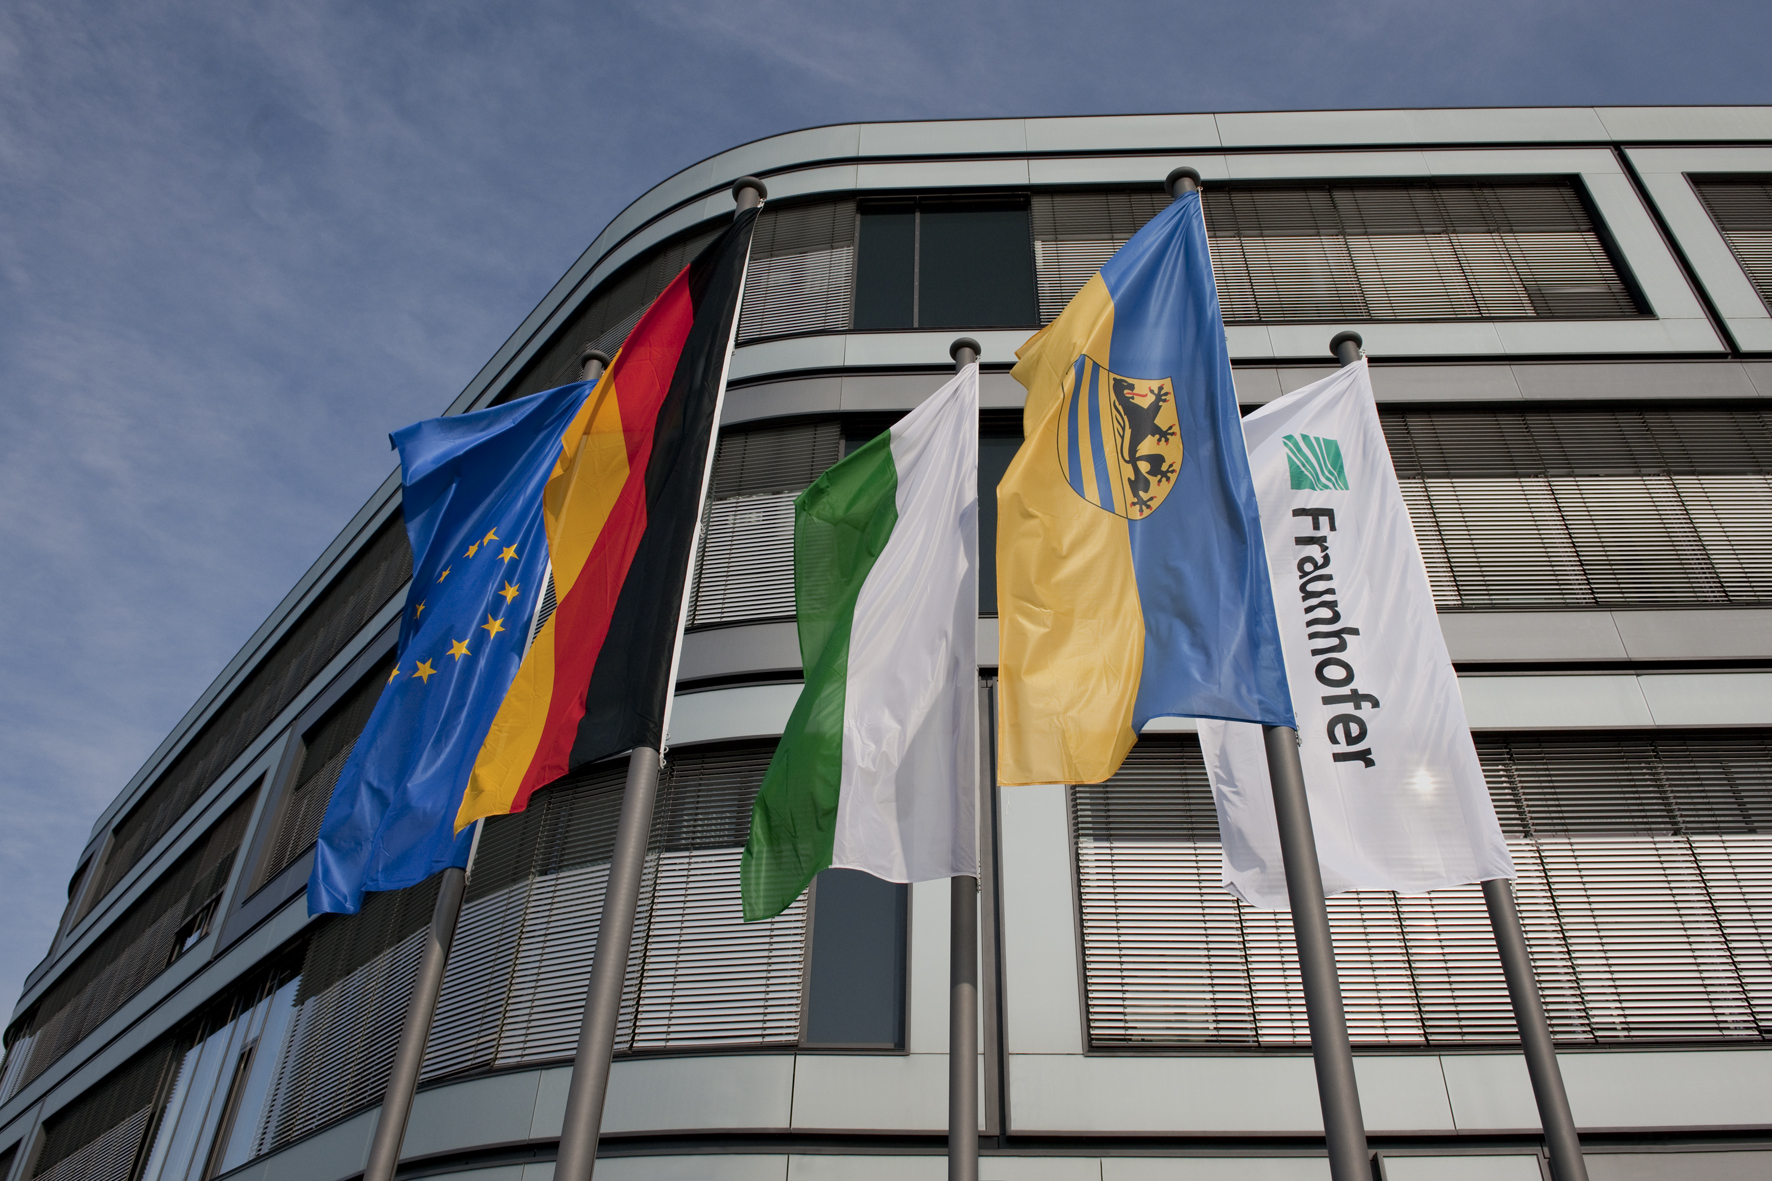 Exterior view of the Fraunhofer IZI building: Detail with flags.